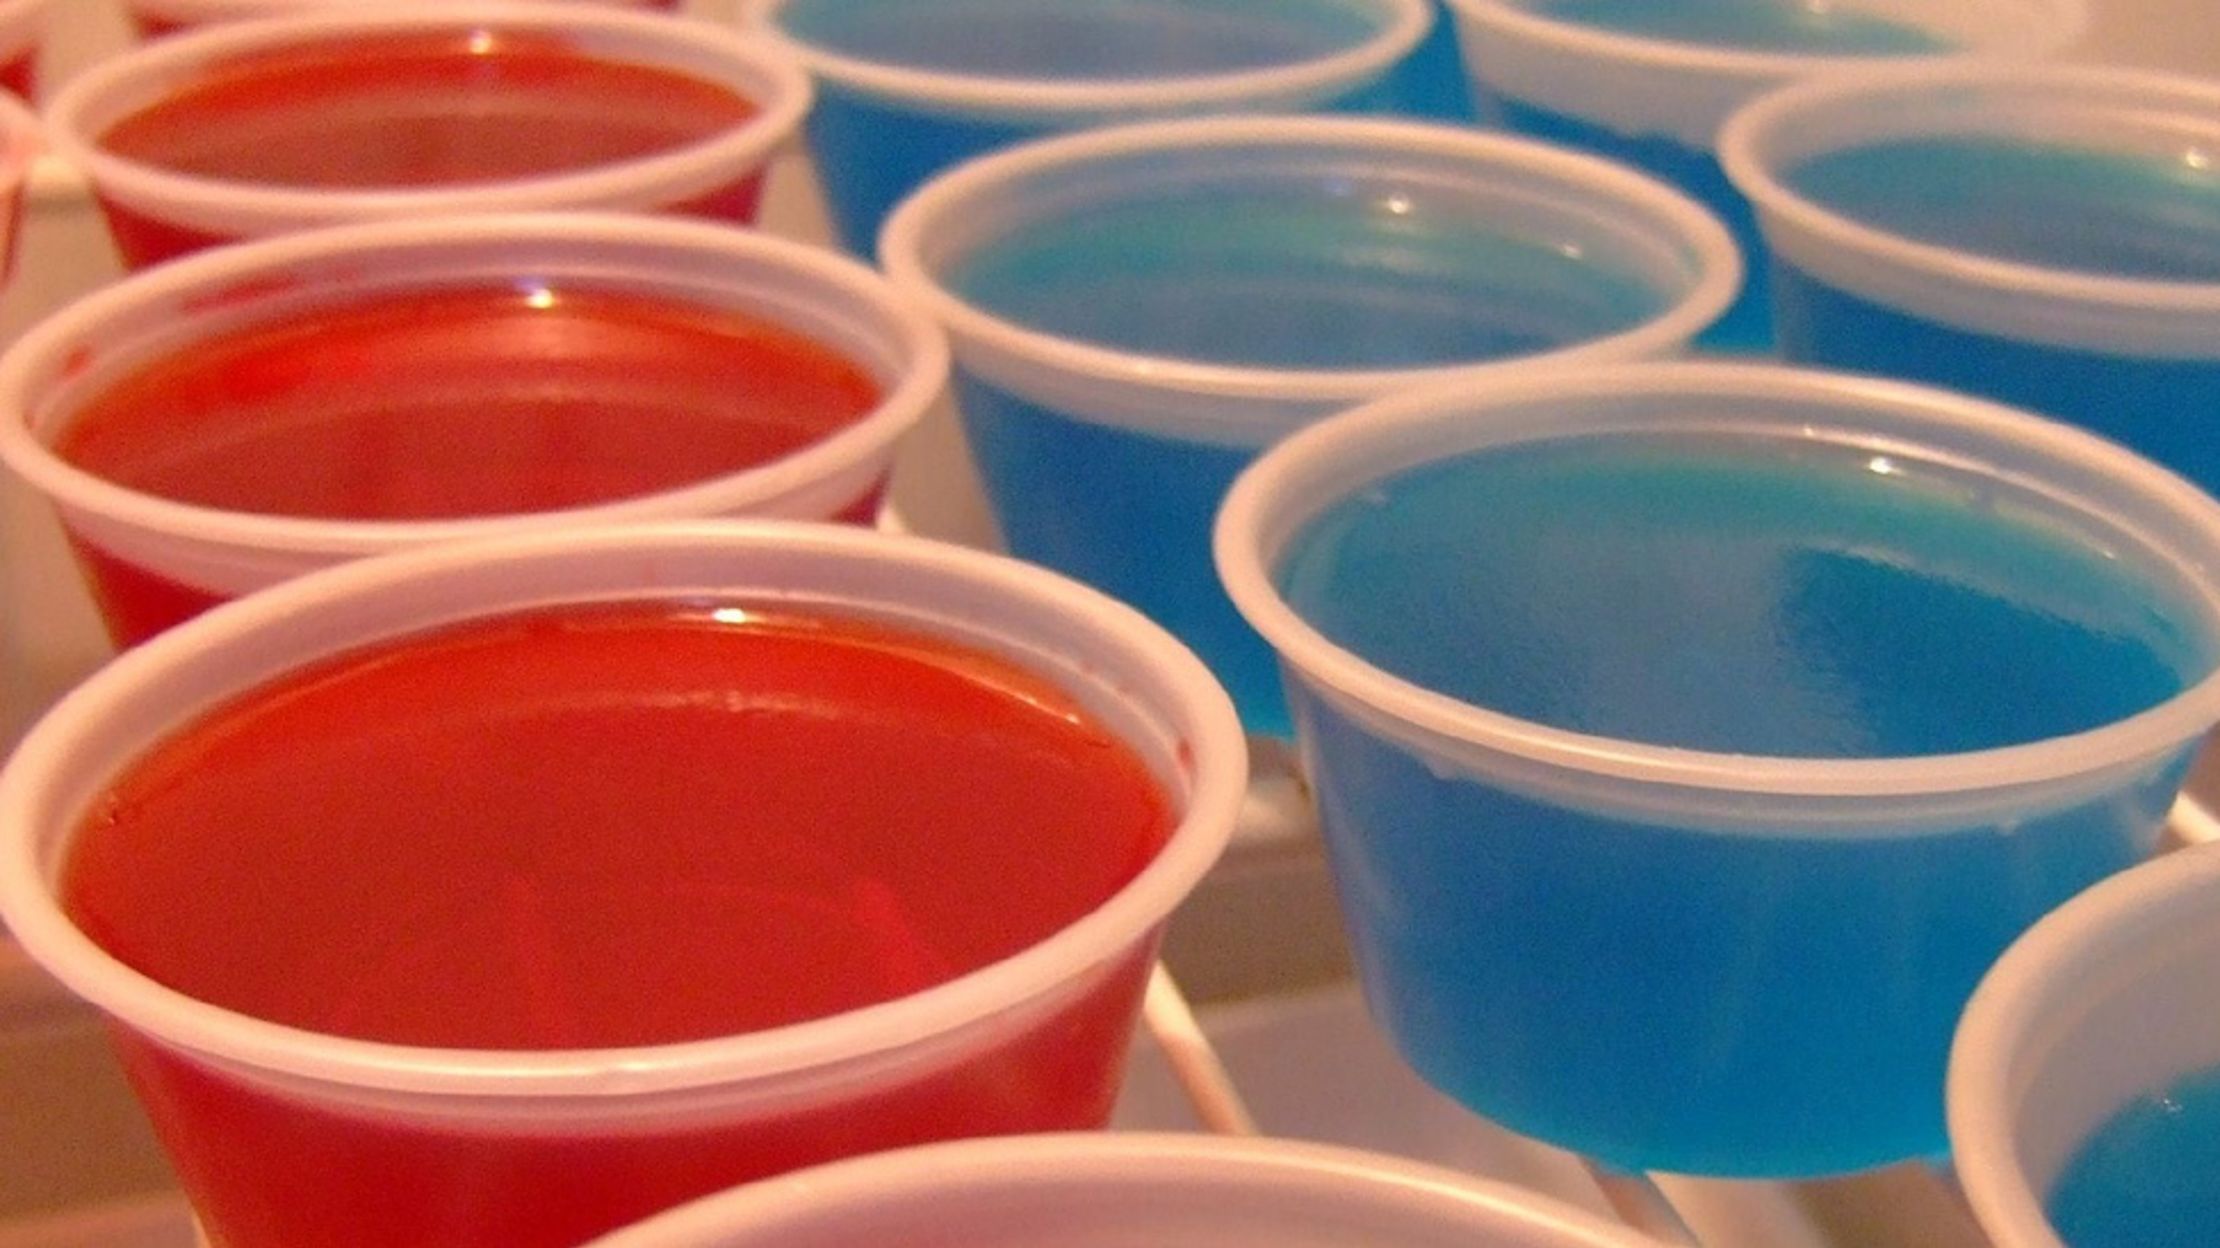 What Is One Jello Shot Equivalent To